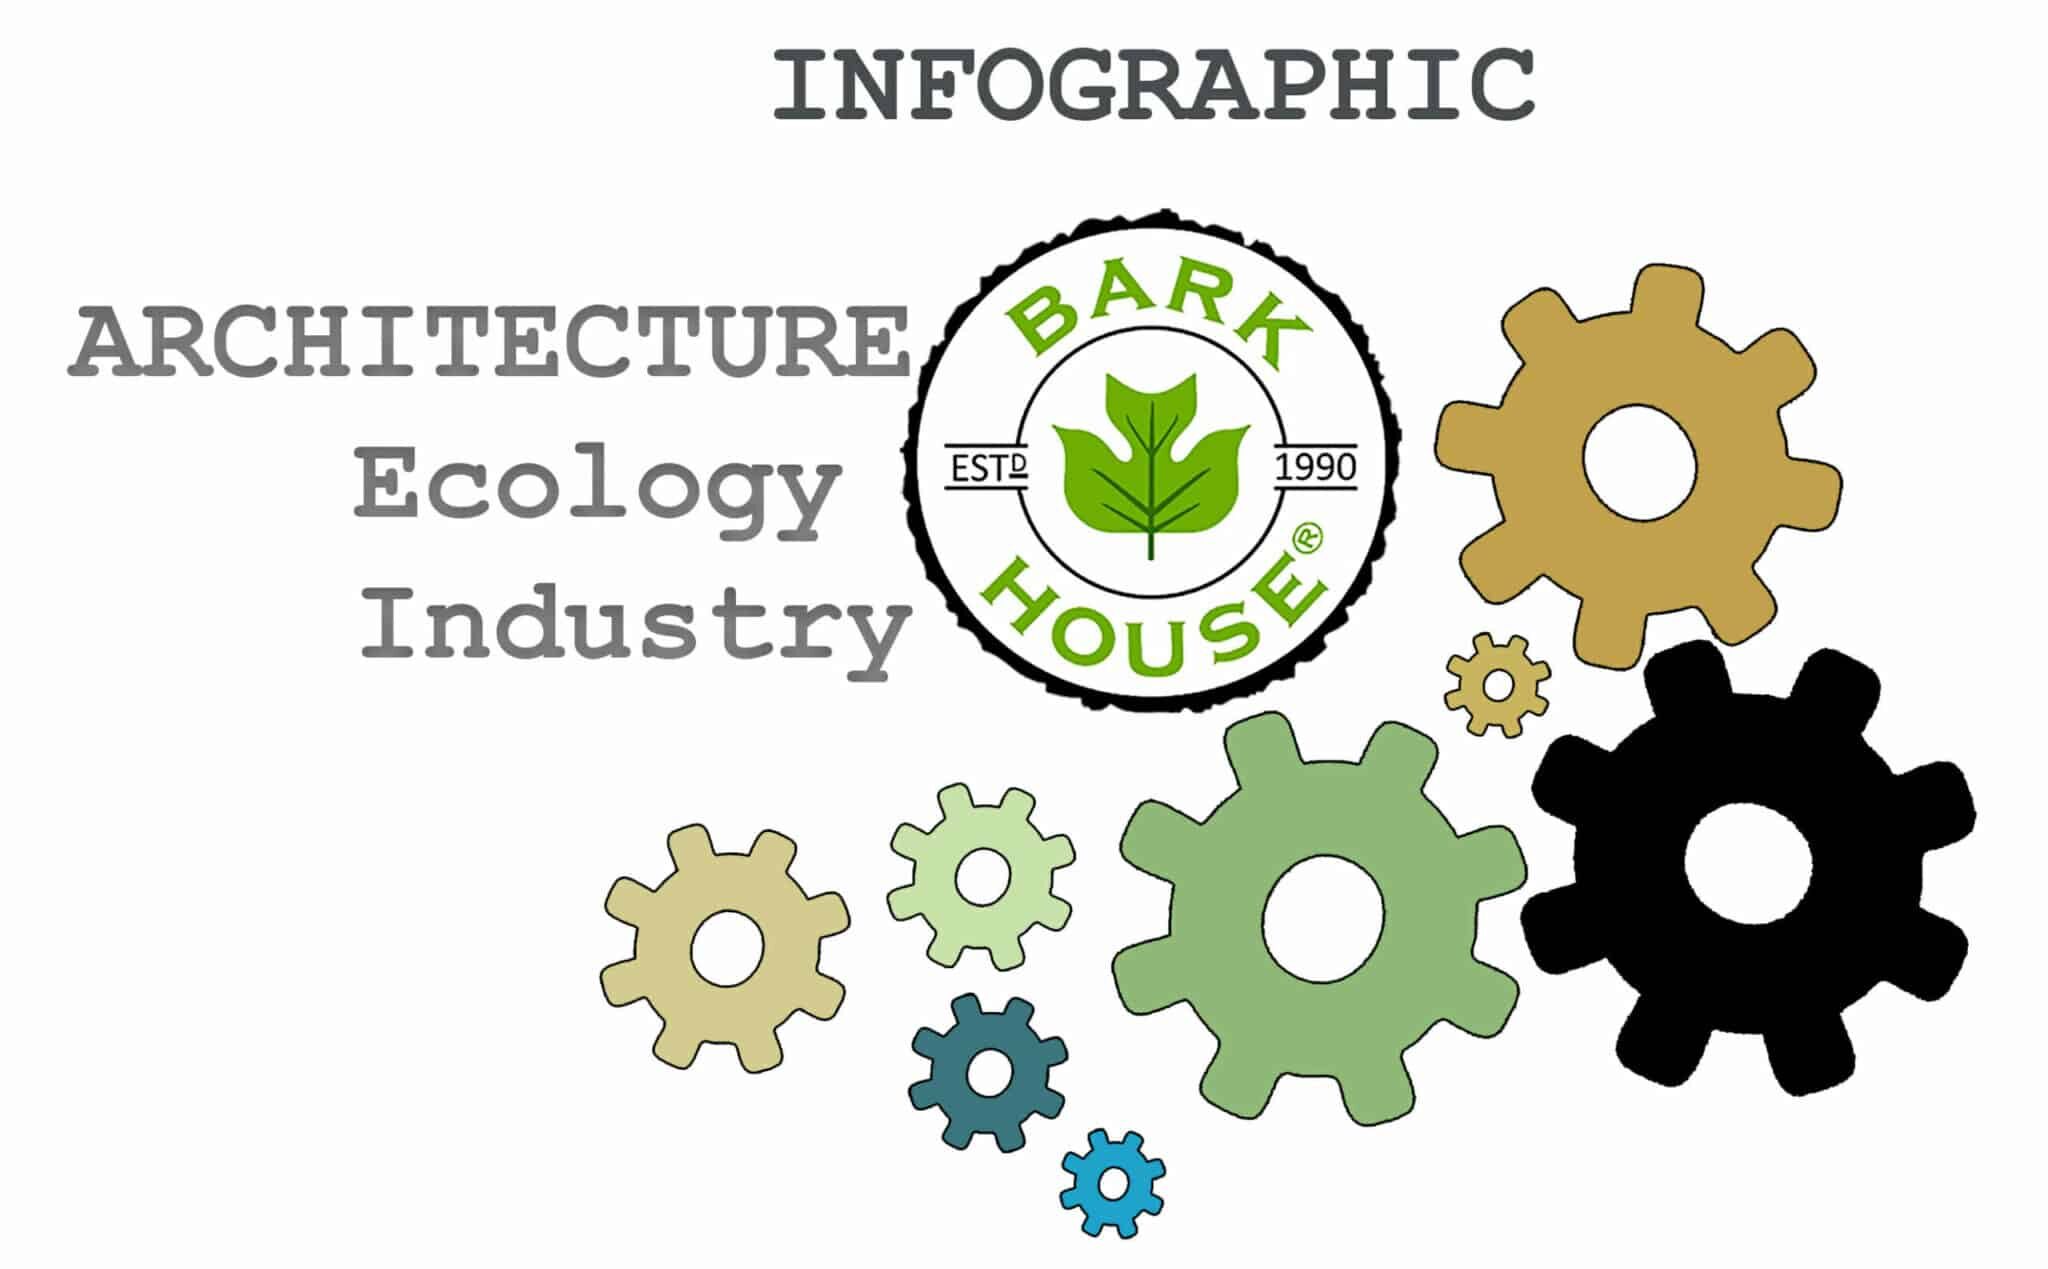 November 2015 EmBark Blog Infographic: Architecture-Ecology-Industry